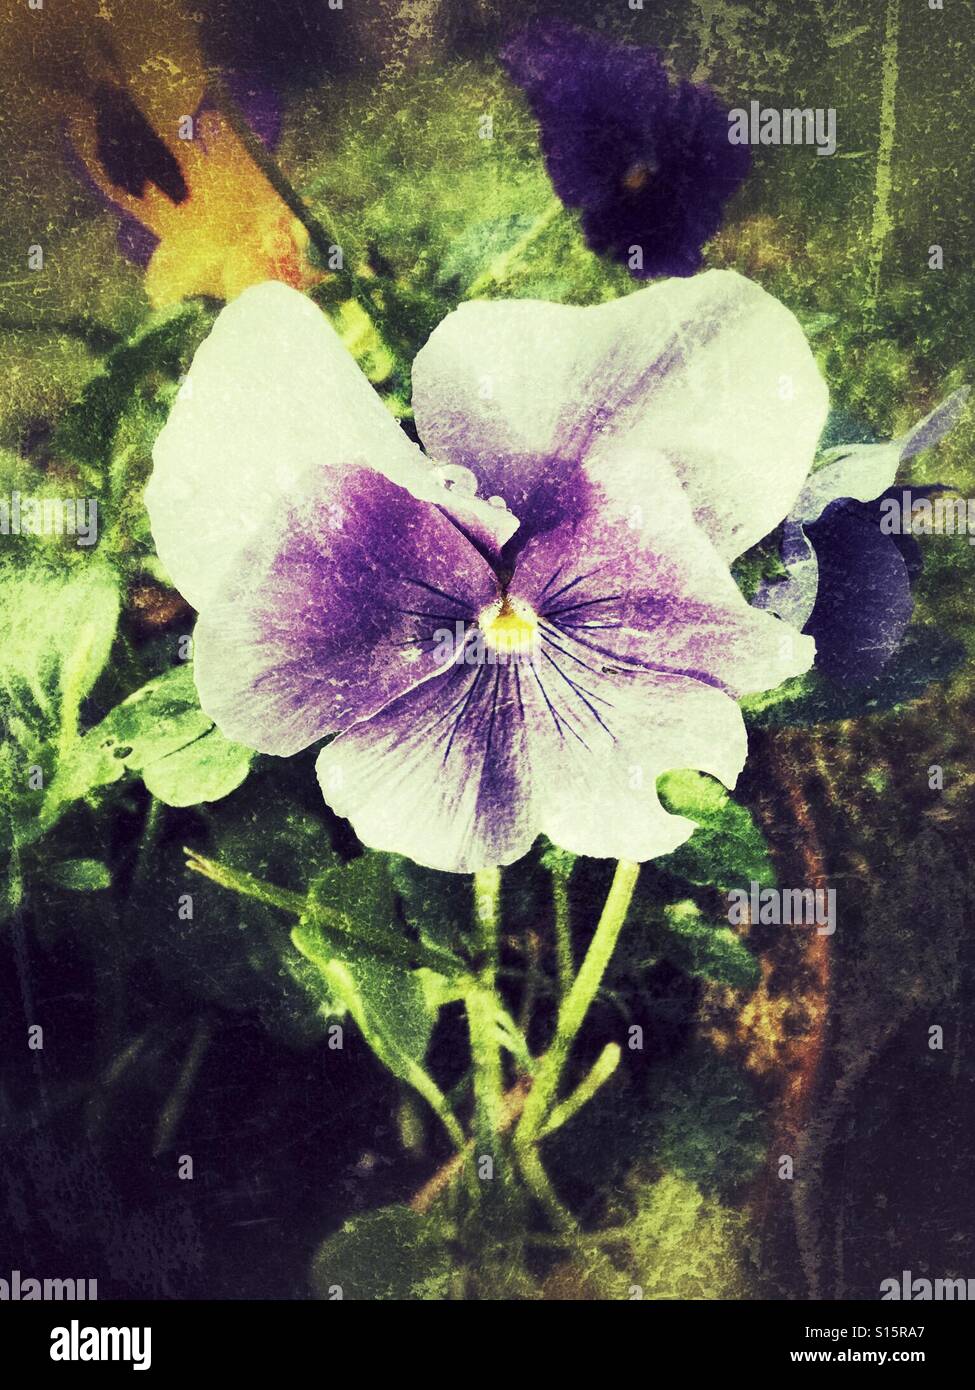 Winter pansy, purple and white with grunge overlay Stock Photo